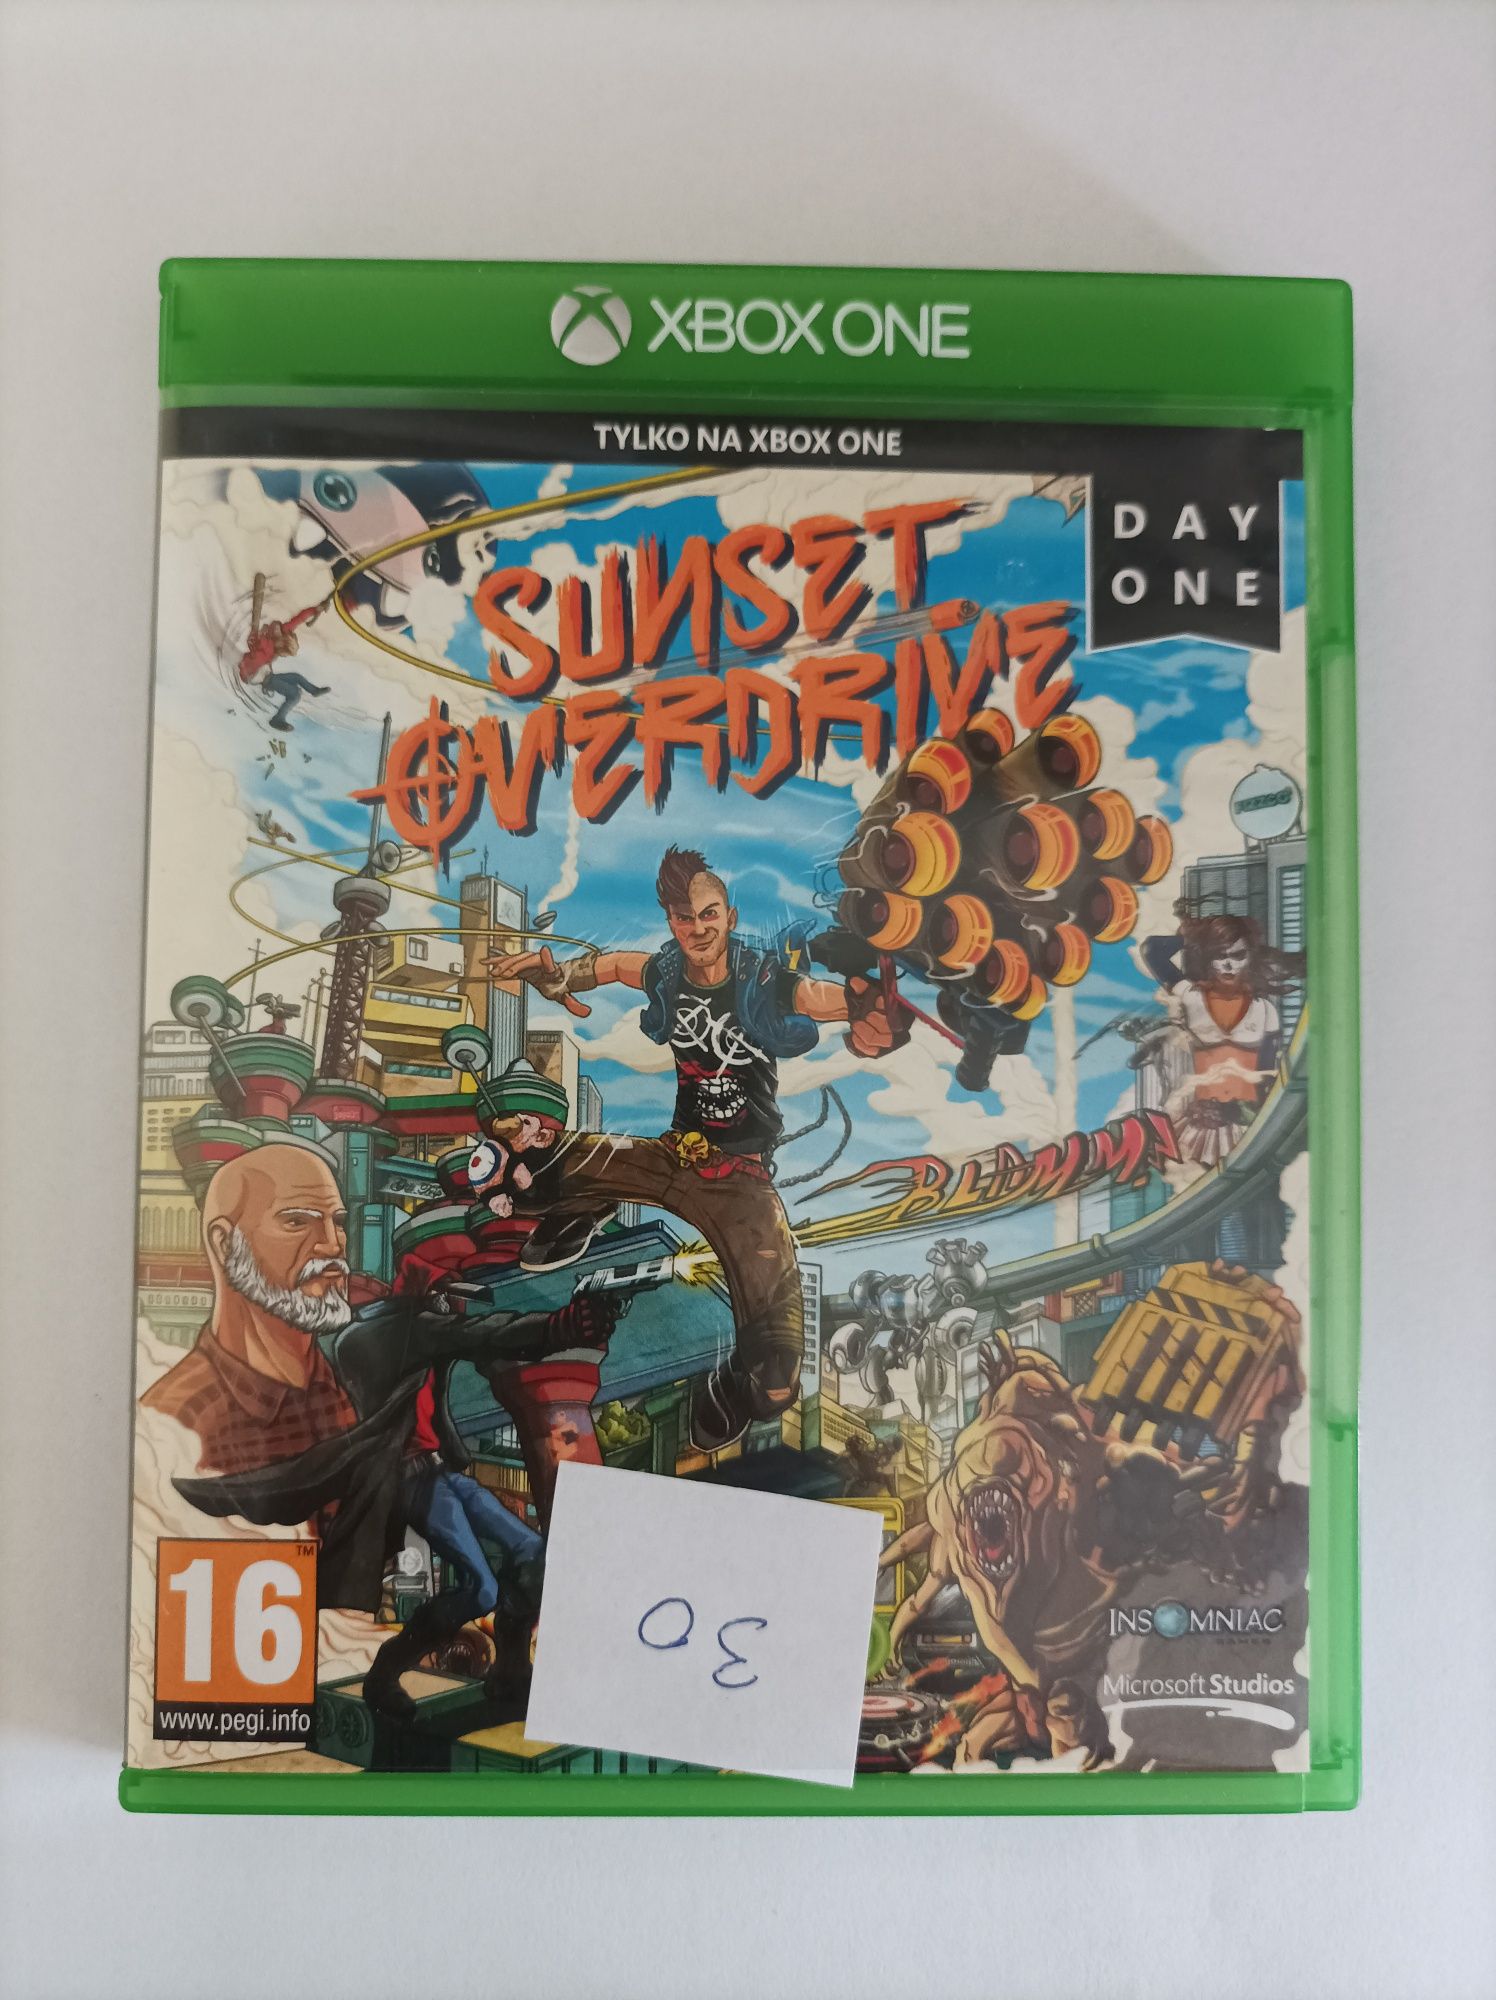 Sunset overdrive Xbox one/series x